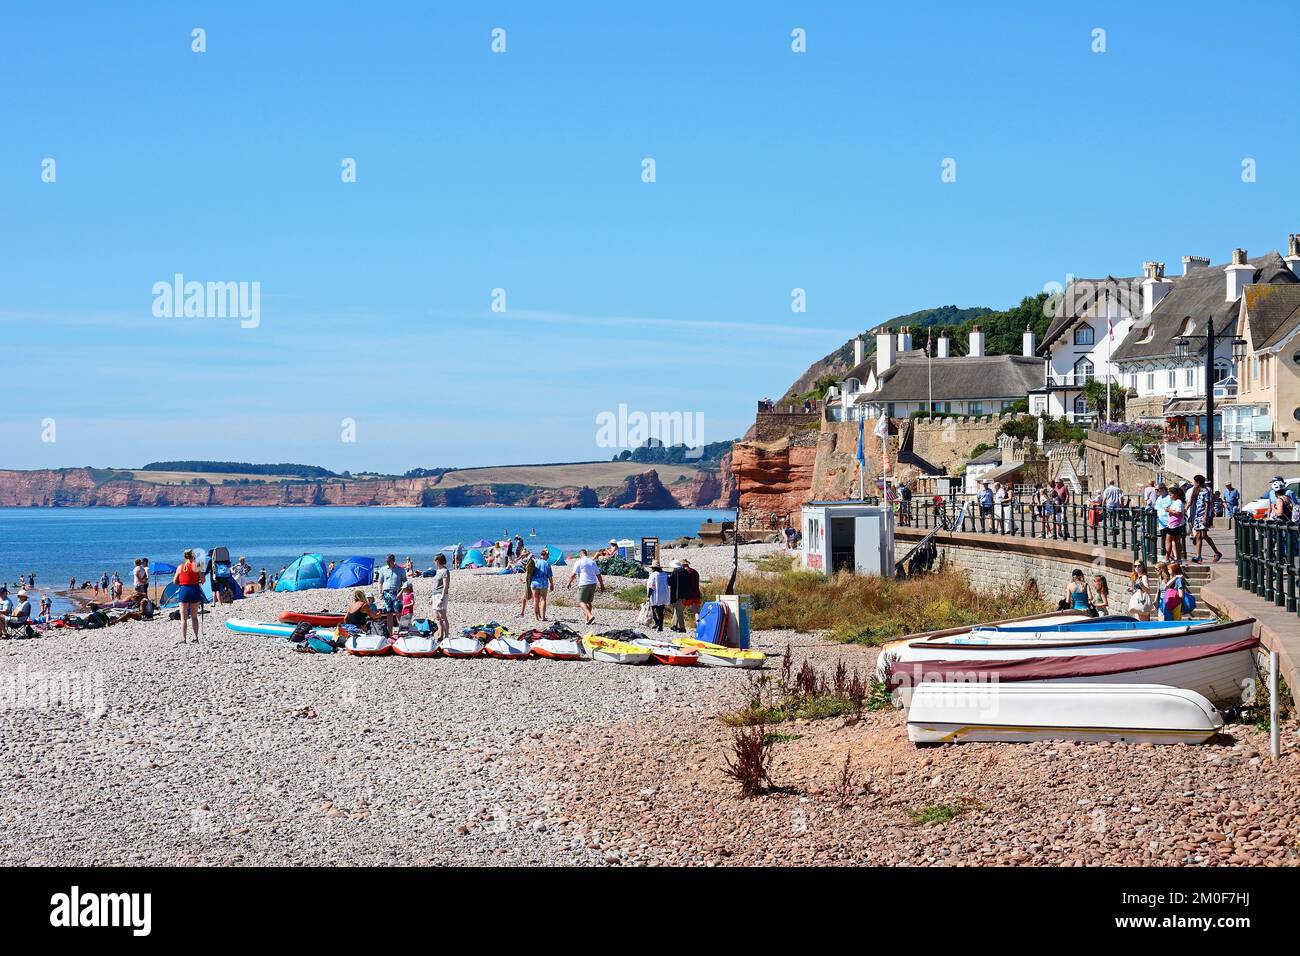 Tourists relaxing on the beach and promenade with views towards the sea and cliffs, Sidmouth, Devon, UK, Europe. Stock Photo